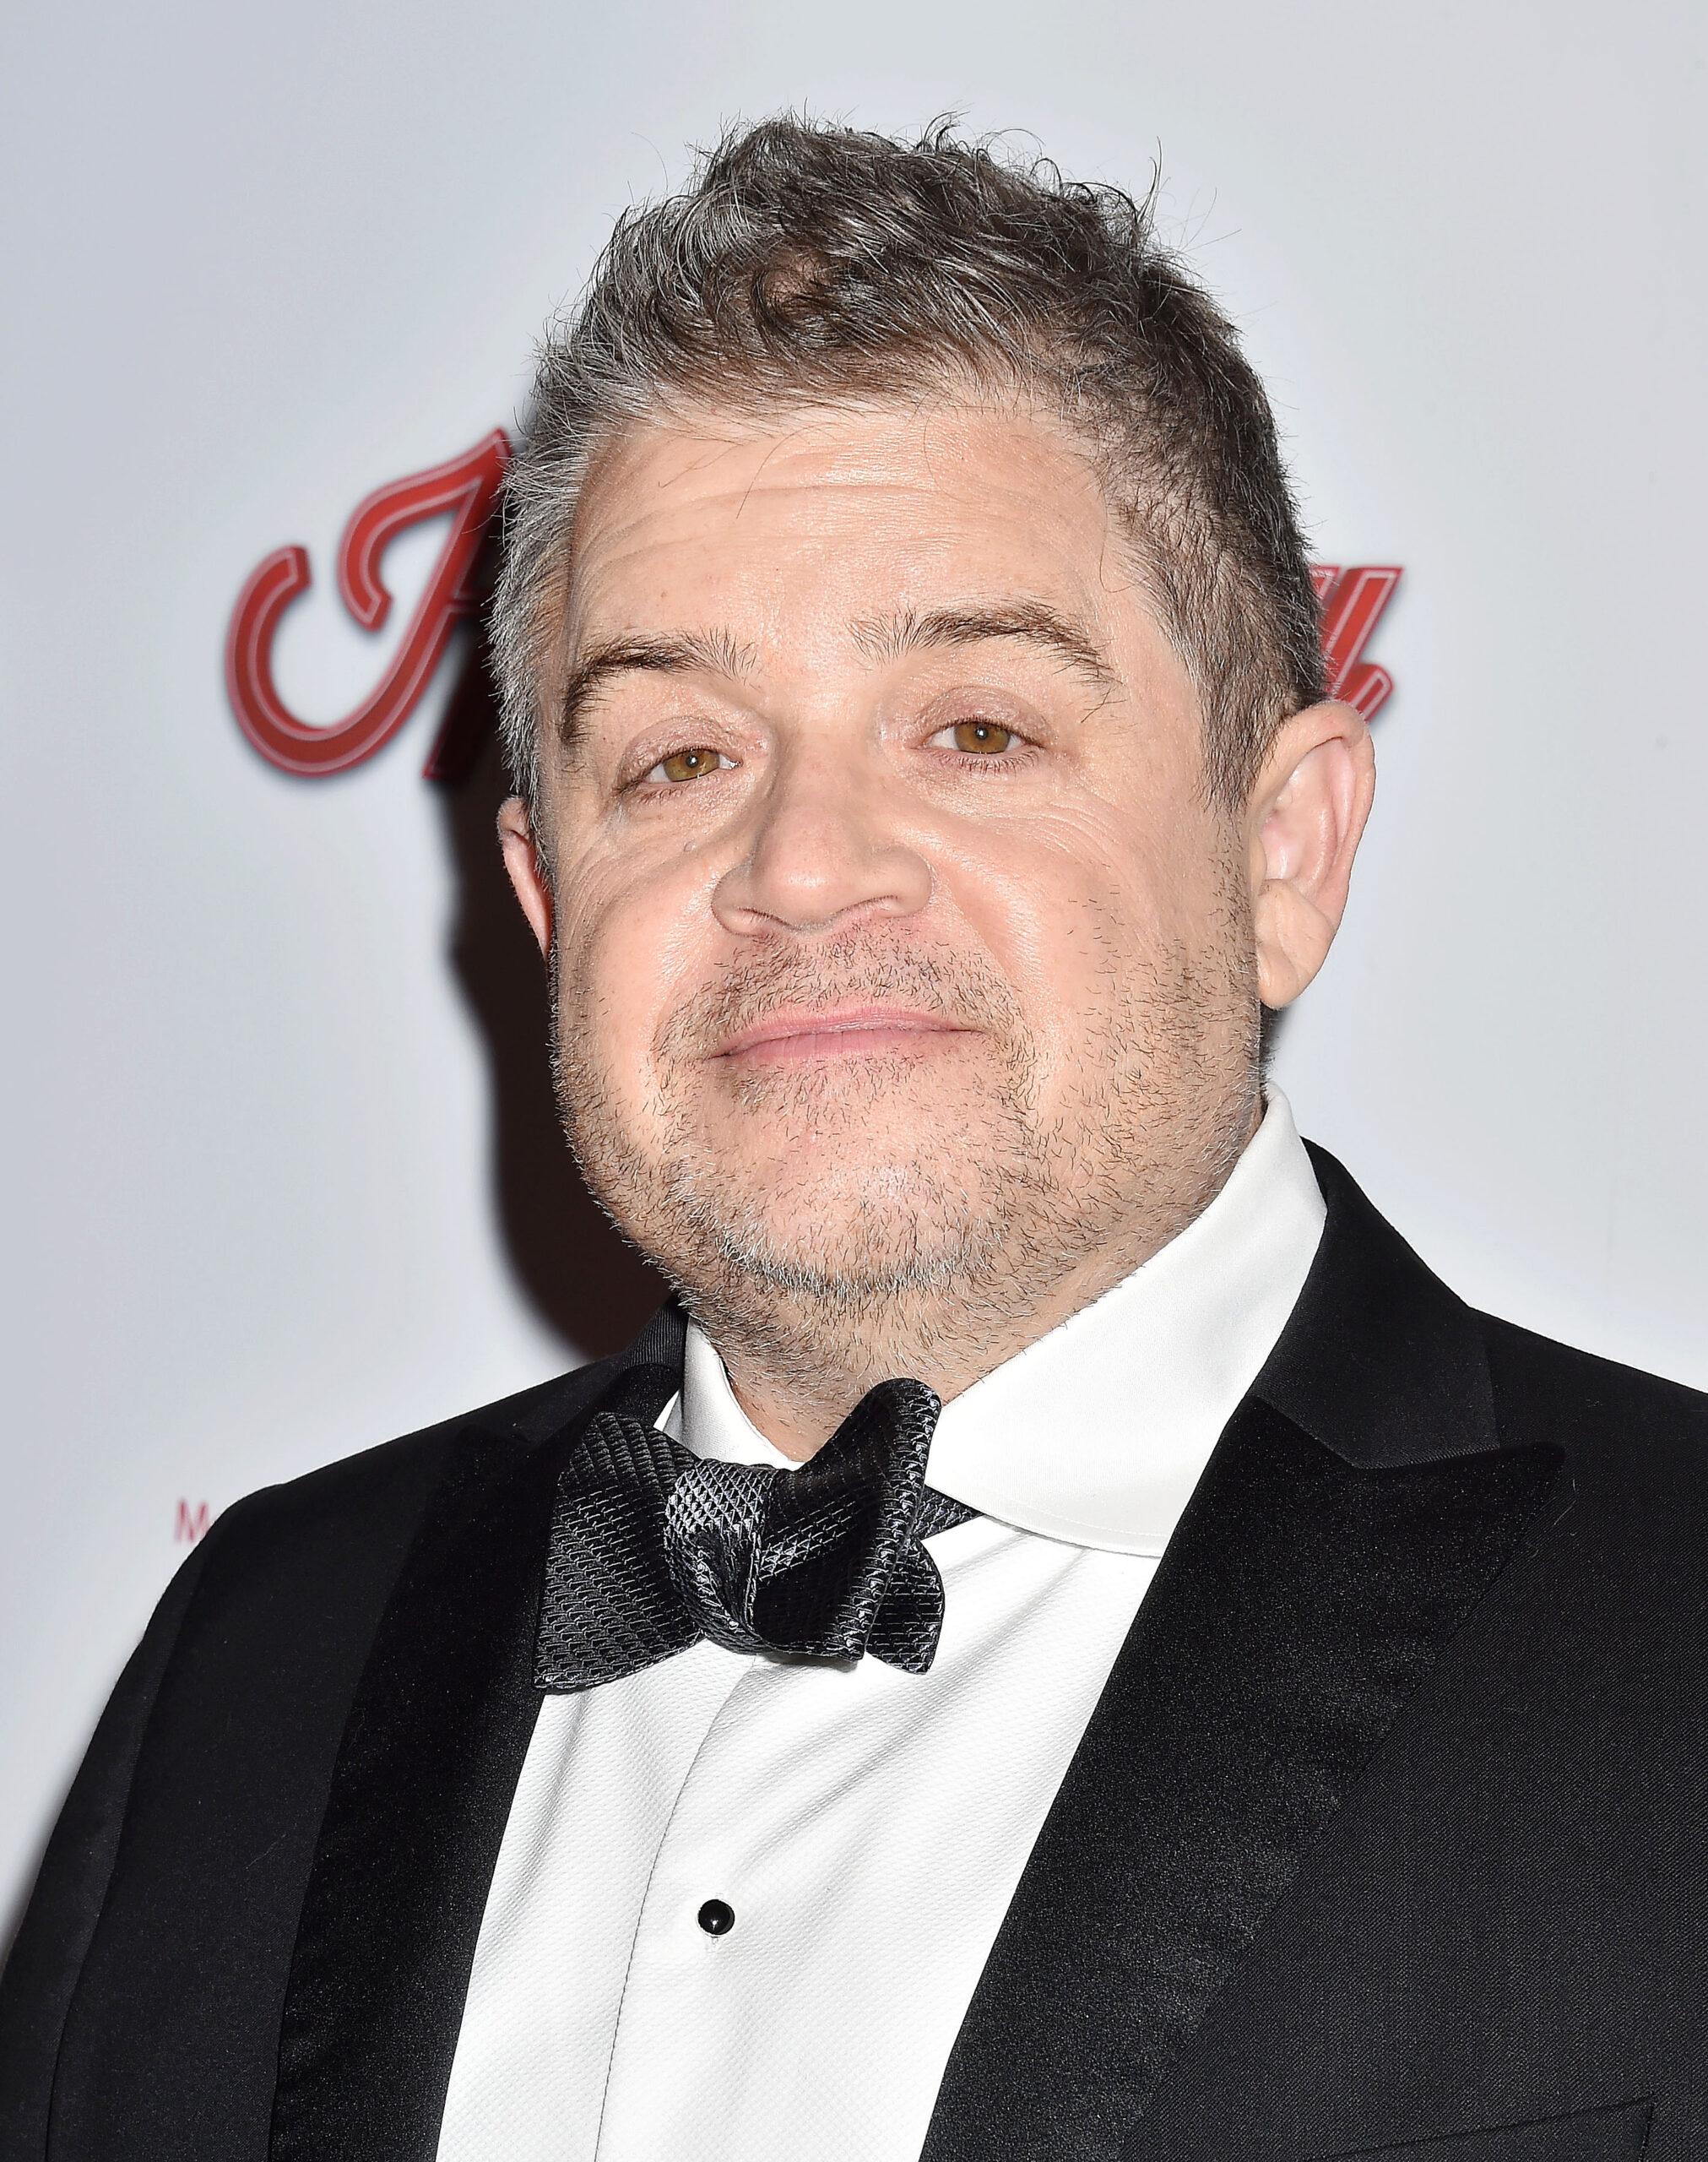 Patton Oswalt at the 33rd American Cinematheque Award Presentation Honoring Charlize Theron - Arrivals